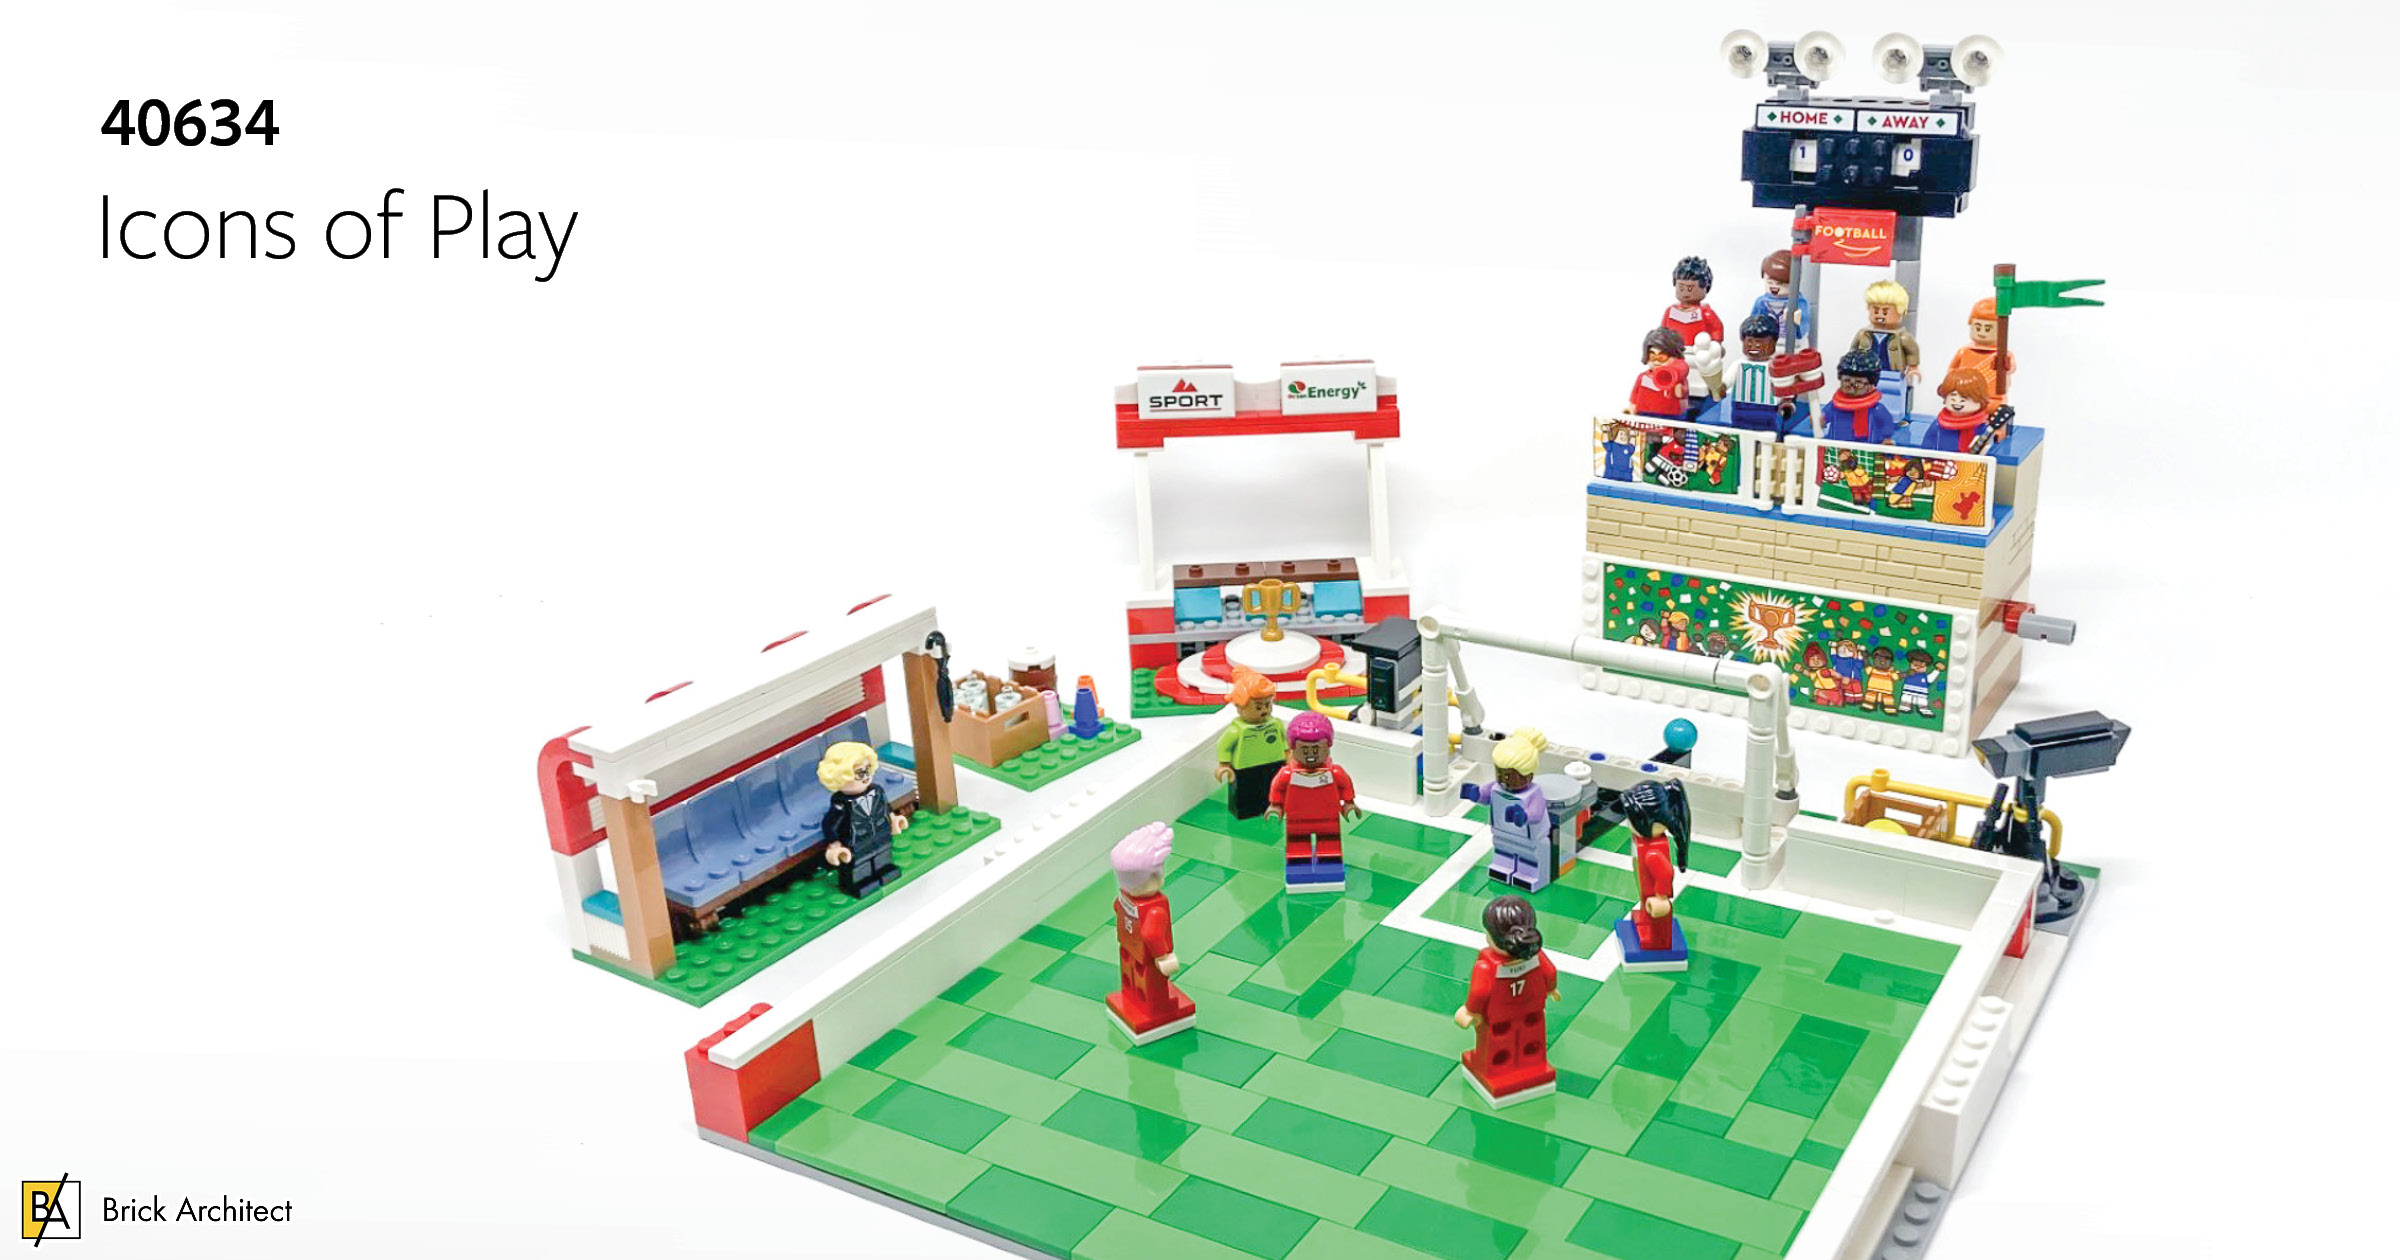 The LEGO Group collaborates with women's football stars to